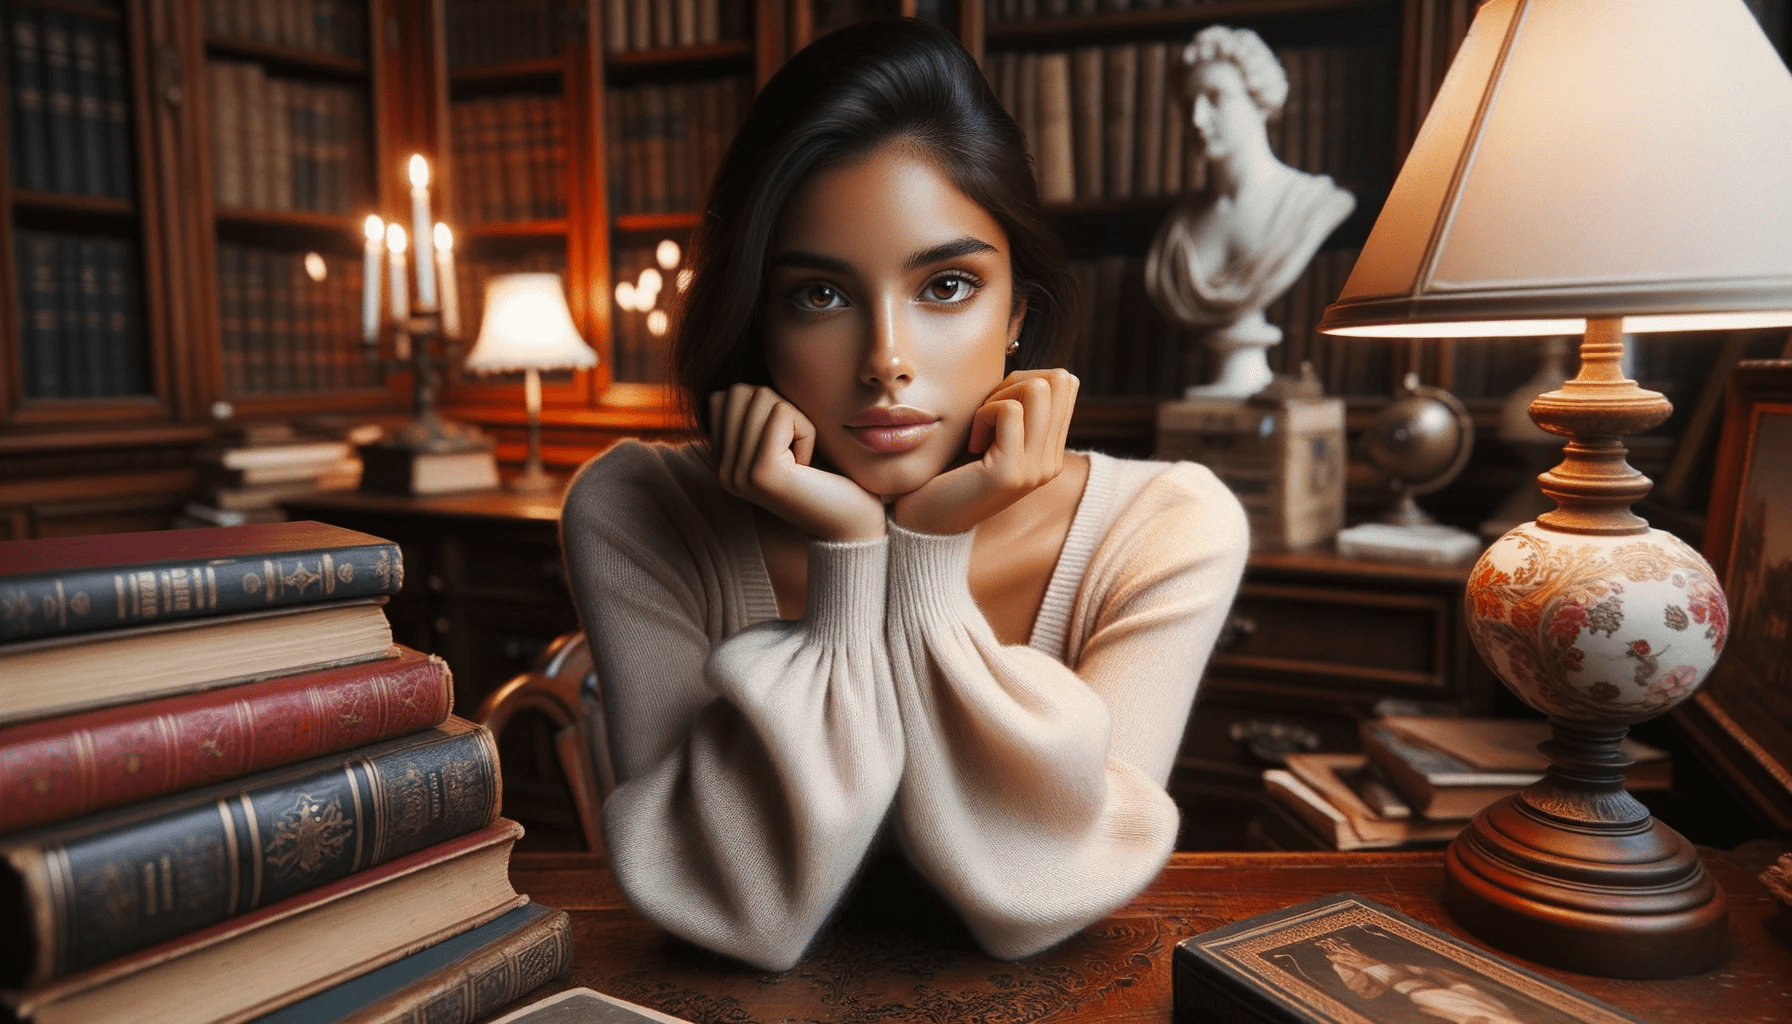 Photo in a vintage study room  A young attractive Latina female sits at an ornate wooden desk surrounded by classic literature and antique artifacts